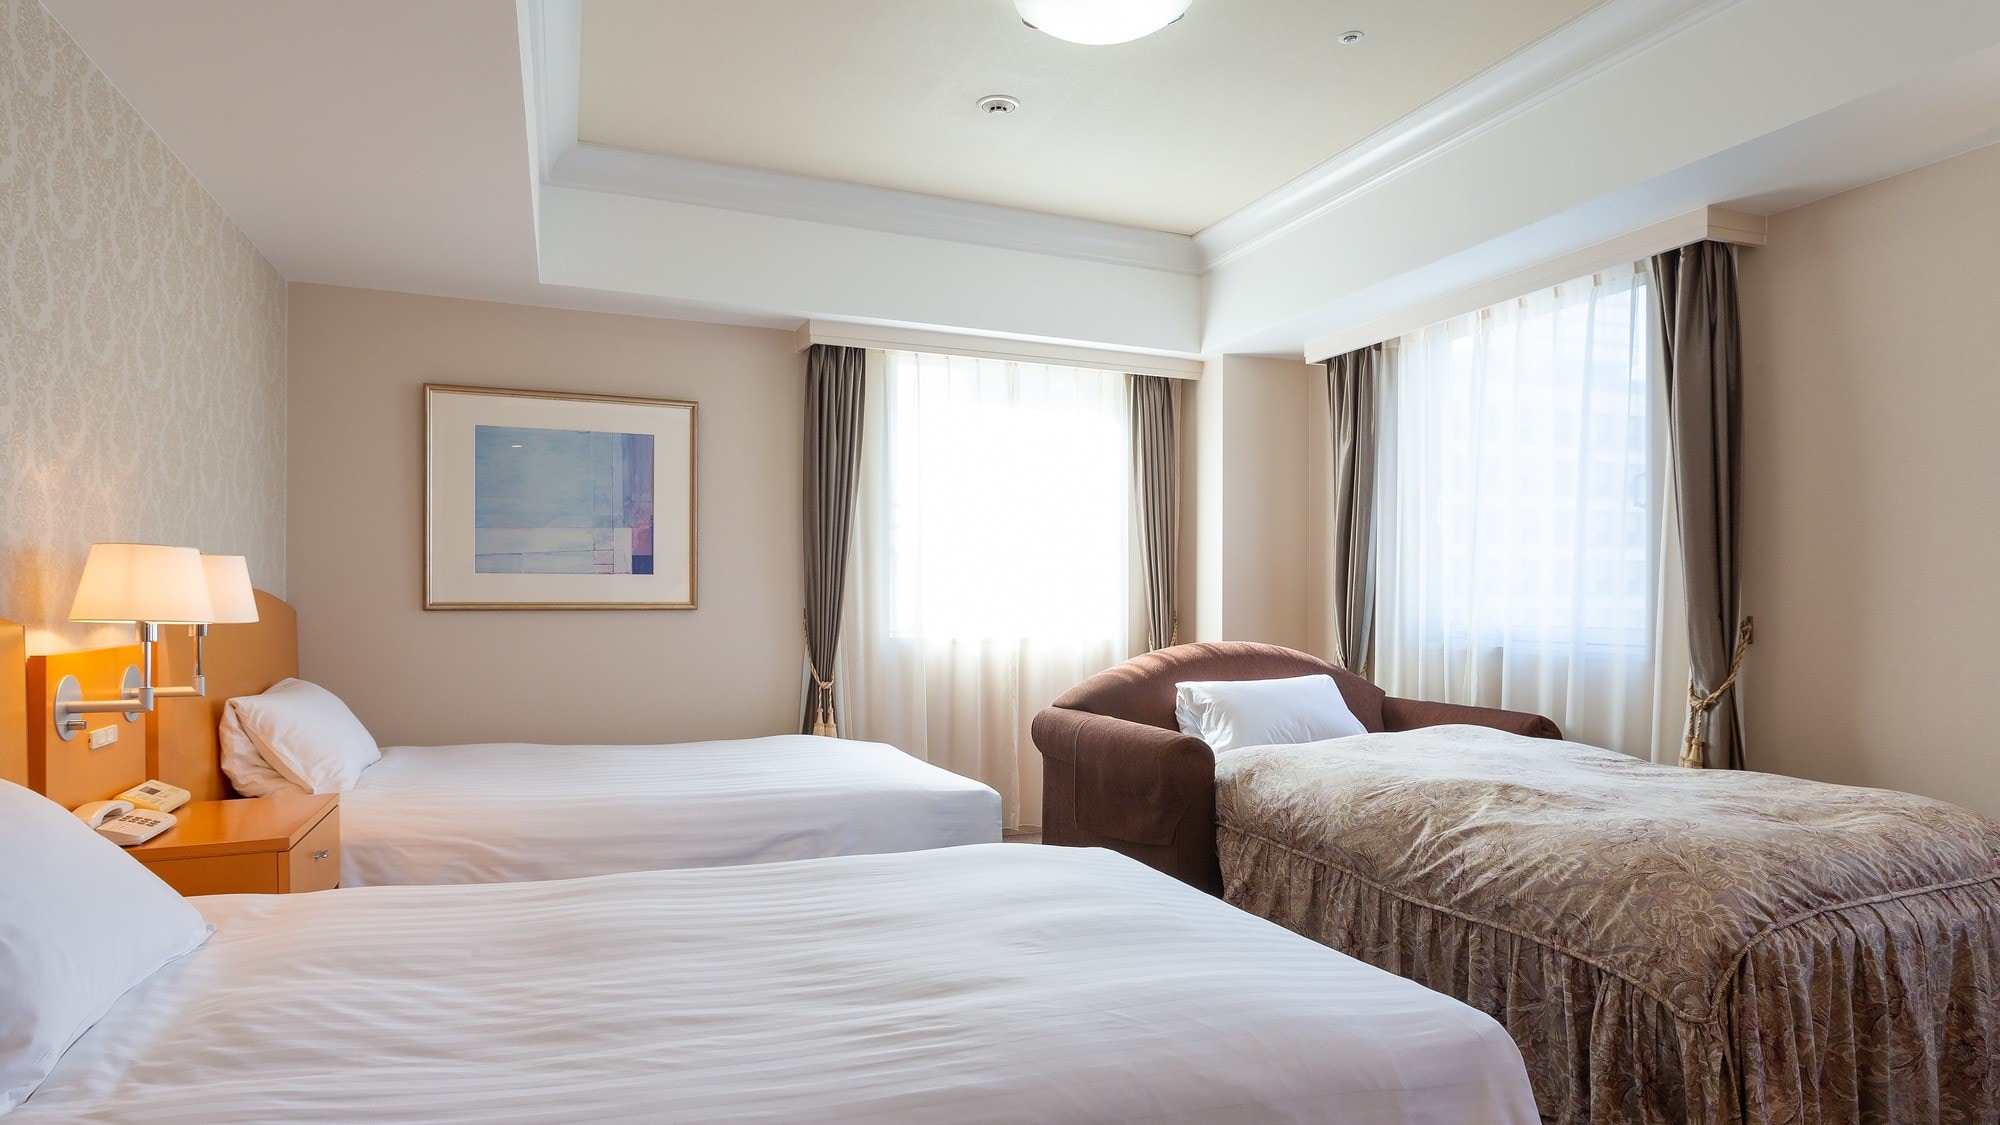 ◇ Non-smoking / Smoking ◆ Triple room (twin bed + extra bed)